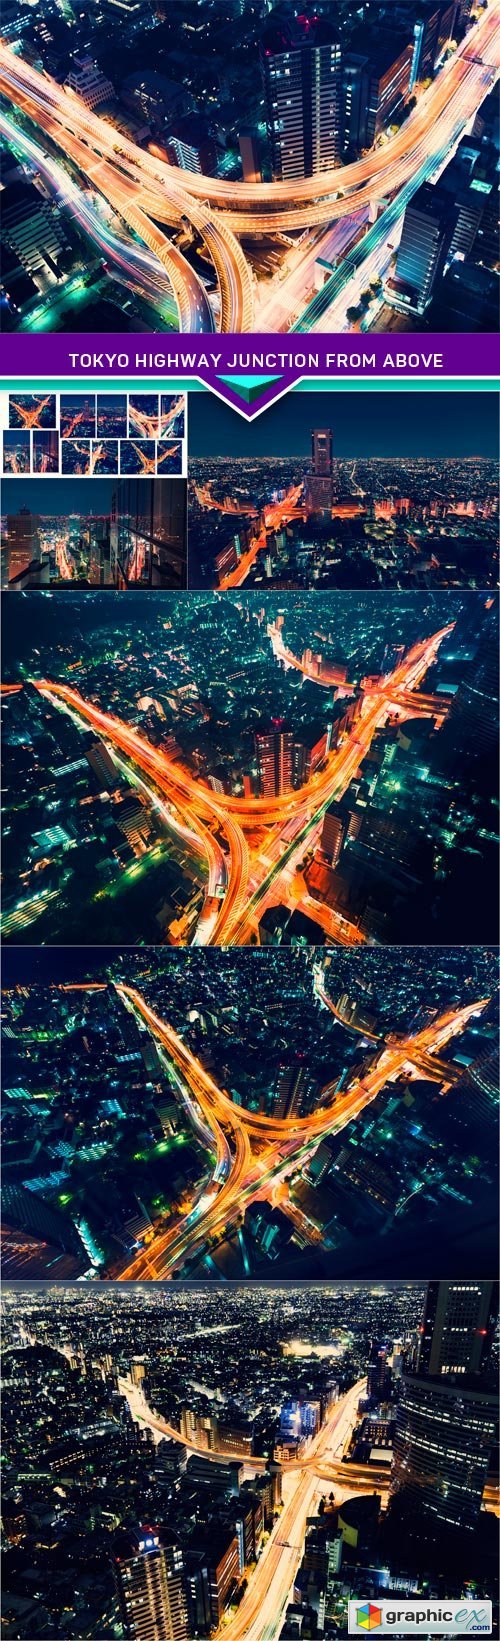 Tokyo highway junction from above 7X JPEG